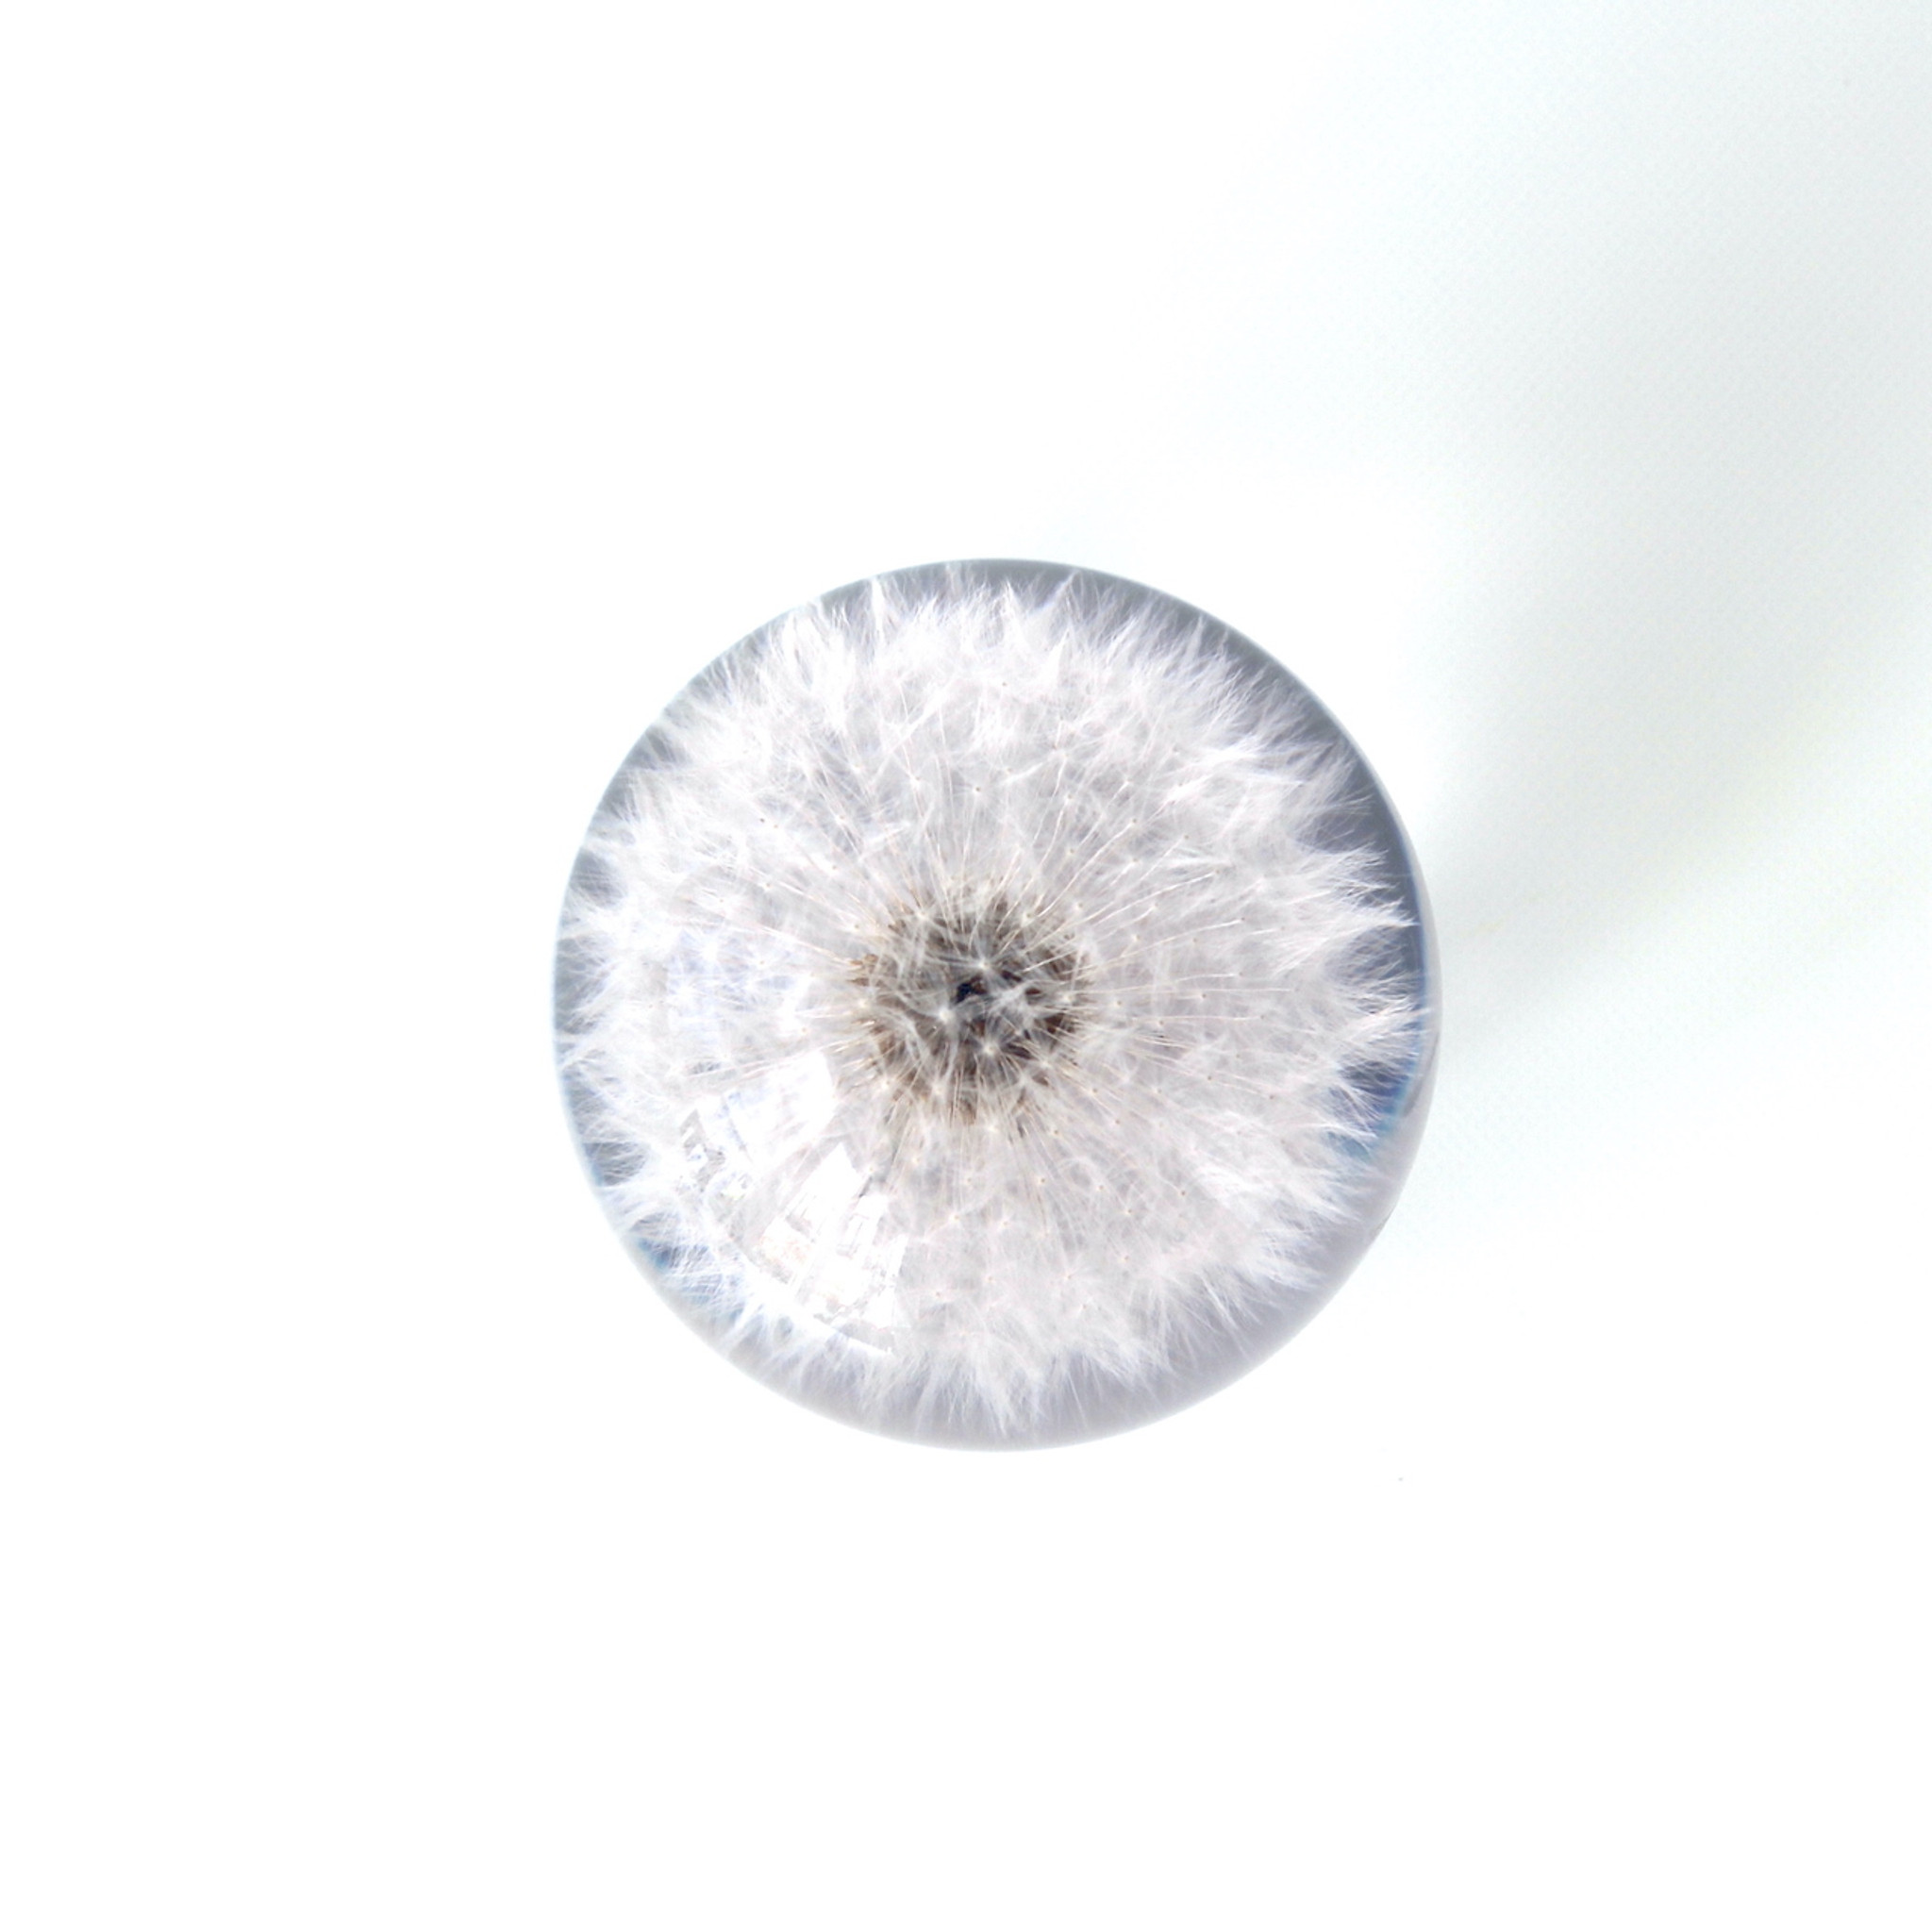 Sustainable Plant Based Eco-Resin Sphere Paperweight - Dandelion – Lei-Lei